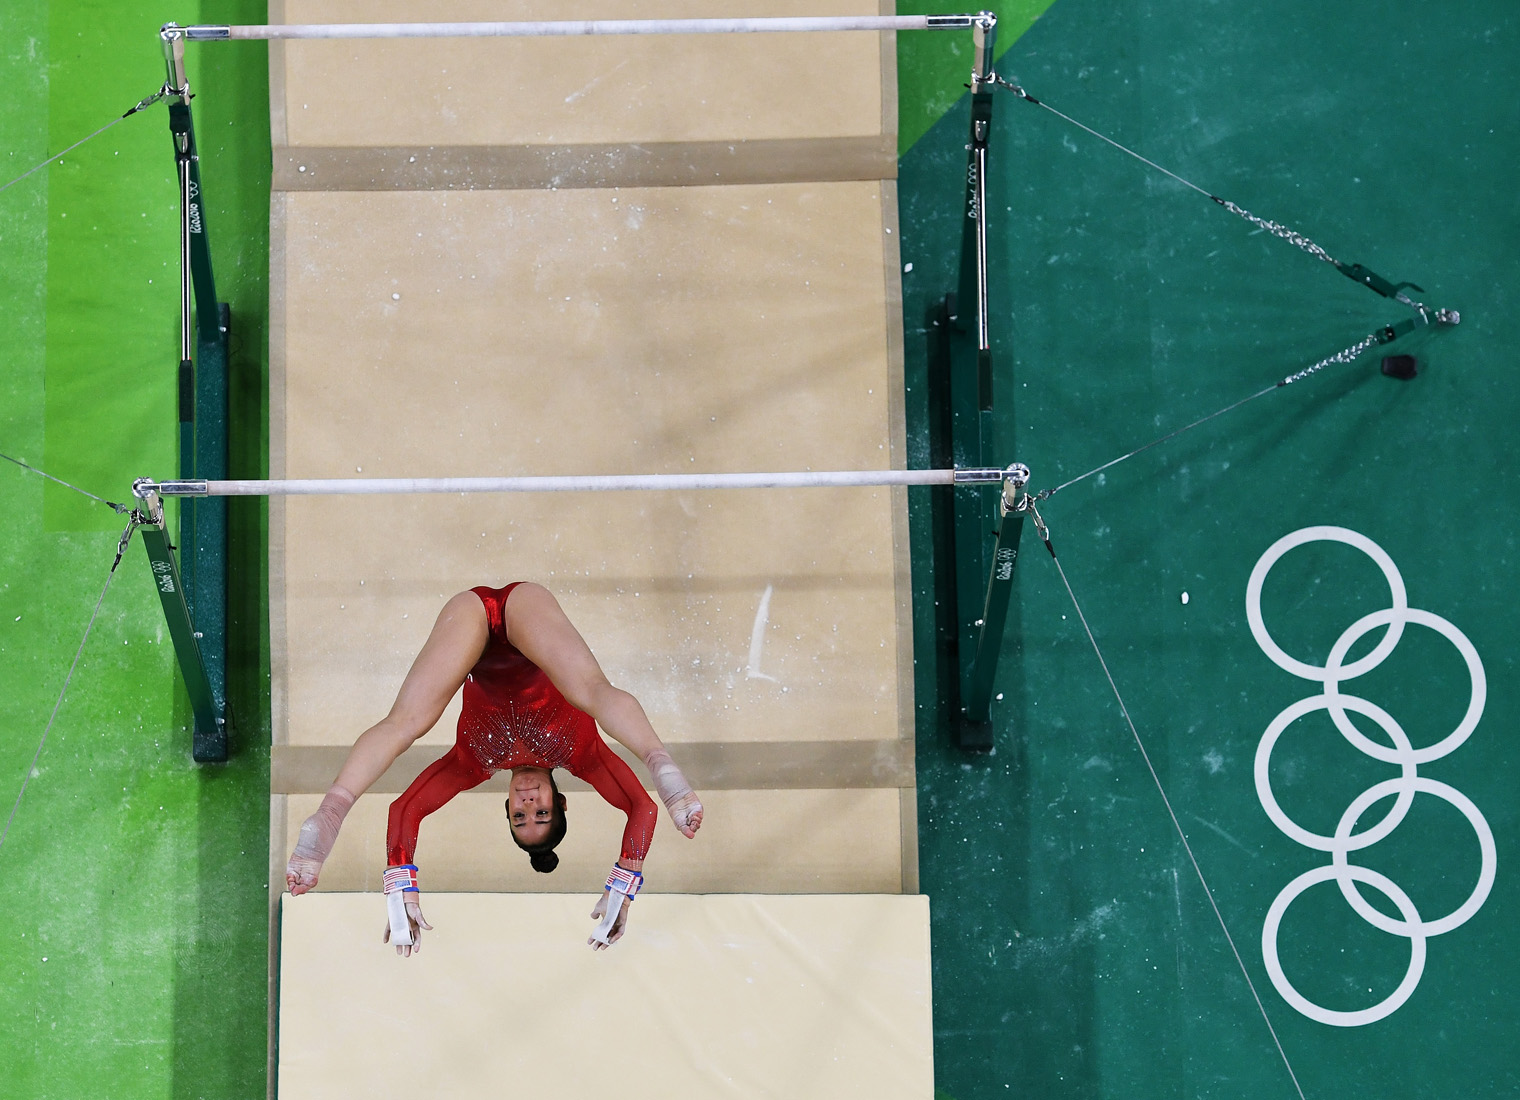 RIO DE JANEIRO, BRAZIL - AUGUST 11: Alexandra Raisman of the United States competes on the uneven bars during the Women's Individual All Around Final on Day 6 of the 2016 Rio Olympics at Rio Olympic Arena on August 11, 2016 in Rio de Janeiro, Brazil. (Photo by Richard Heathcote/Getty Images)